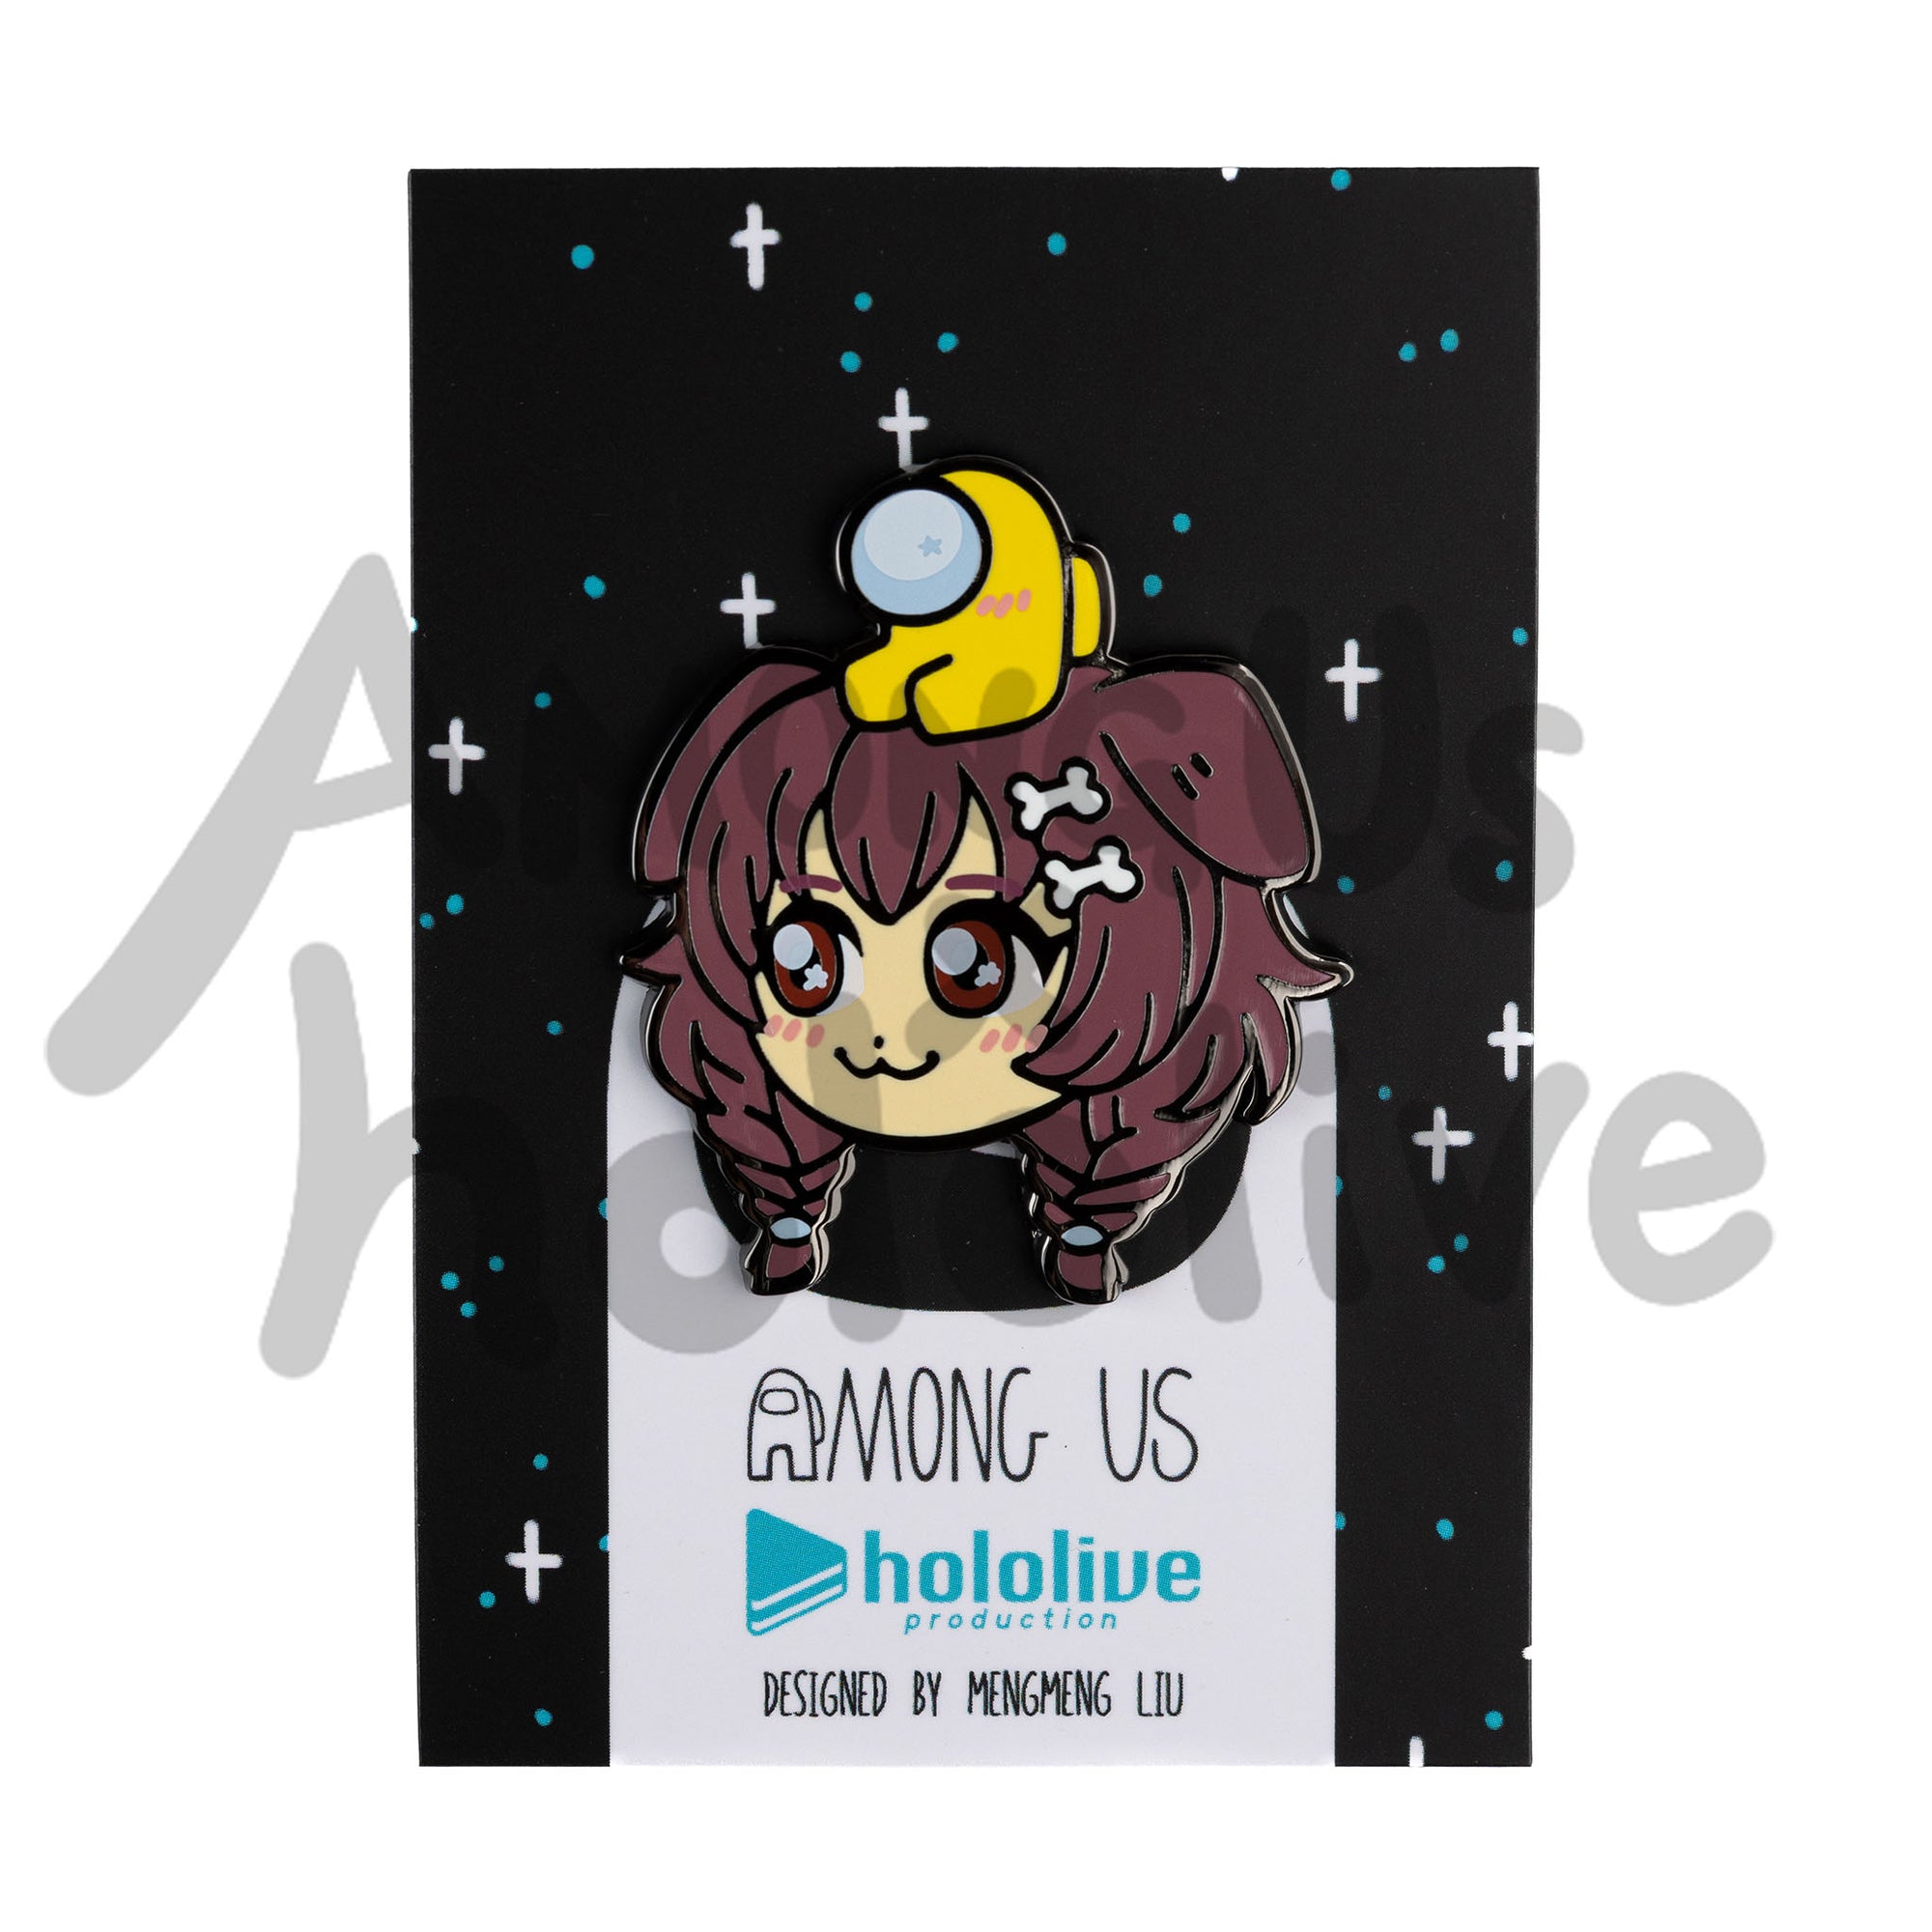 Enamel Pin of Inugami Korone's Face from Hololive. Marine has fair skin, crismon sparkly eyes, and brown hair braided into long pigtails. Her hair clips are little white bones. There's a Yellow Crewmate sitting atop her head. Both characters have pink blush marks on their face.